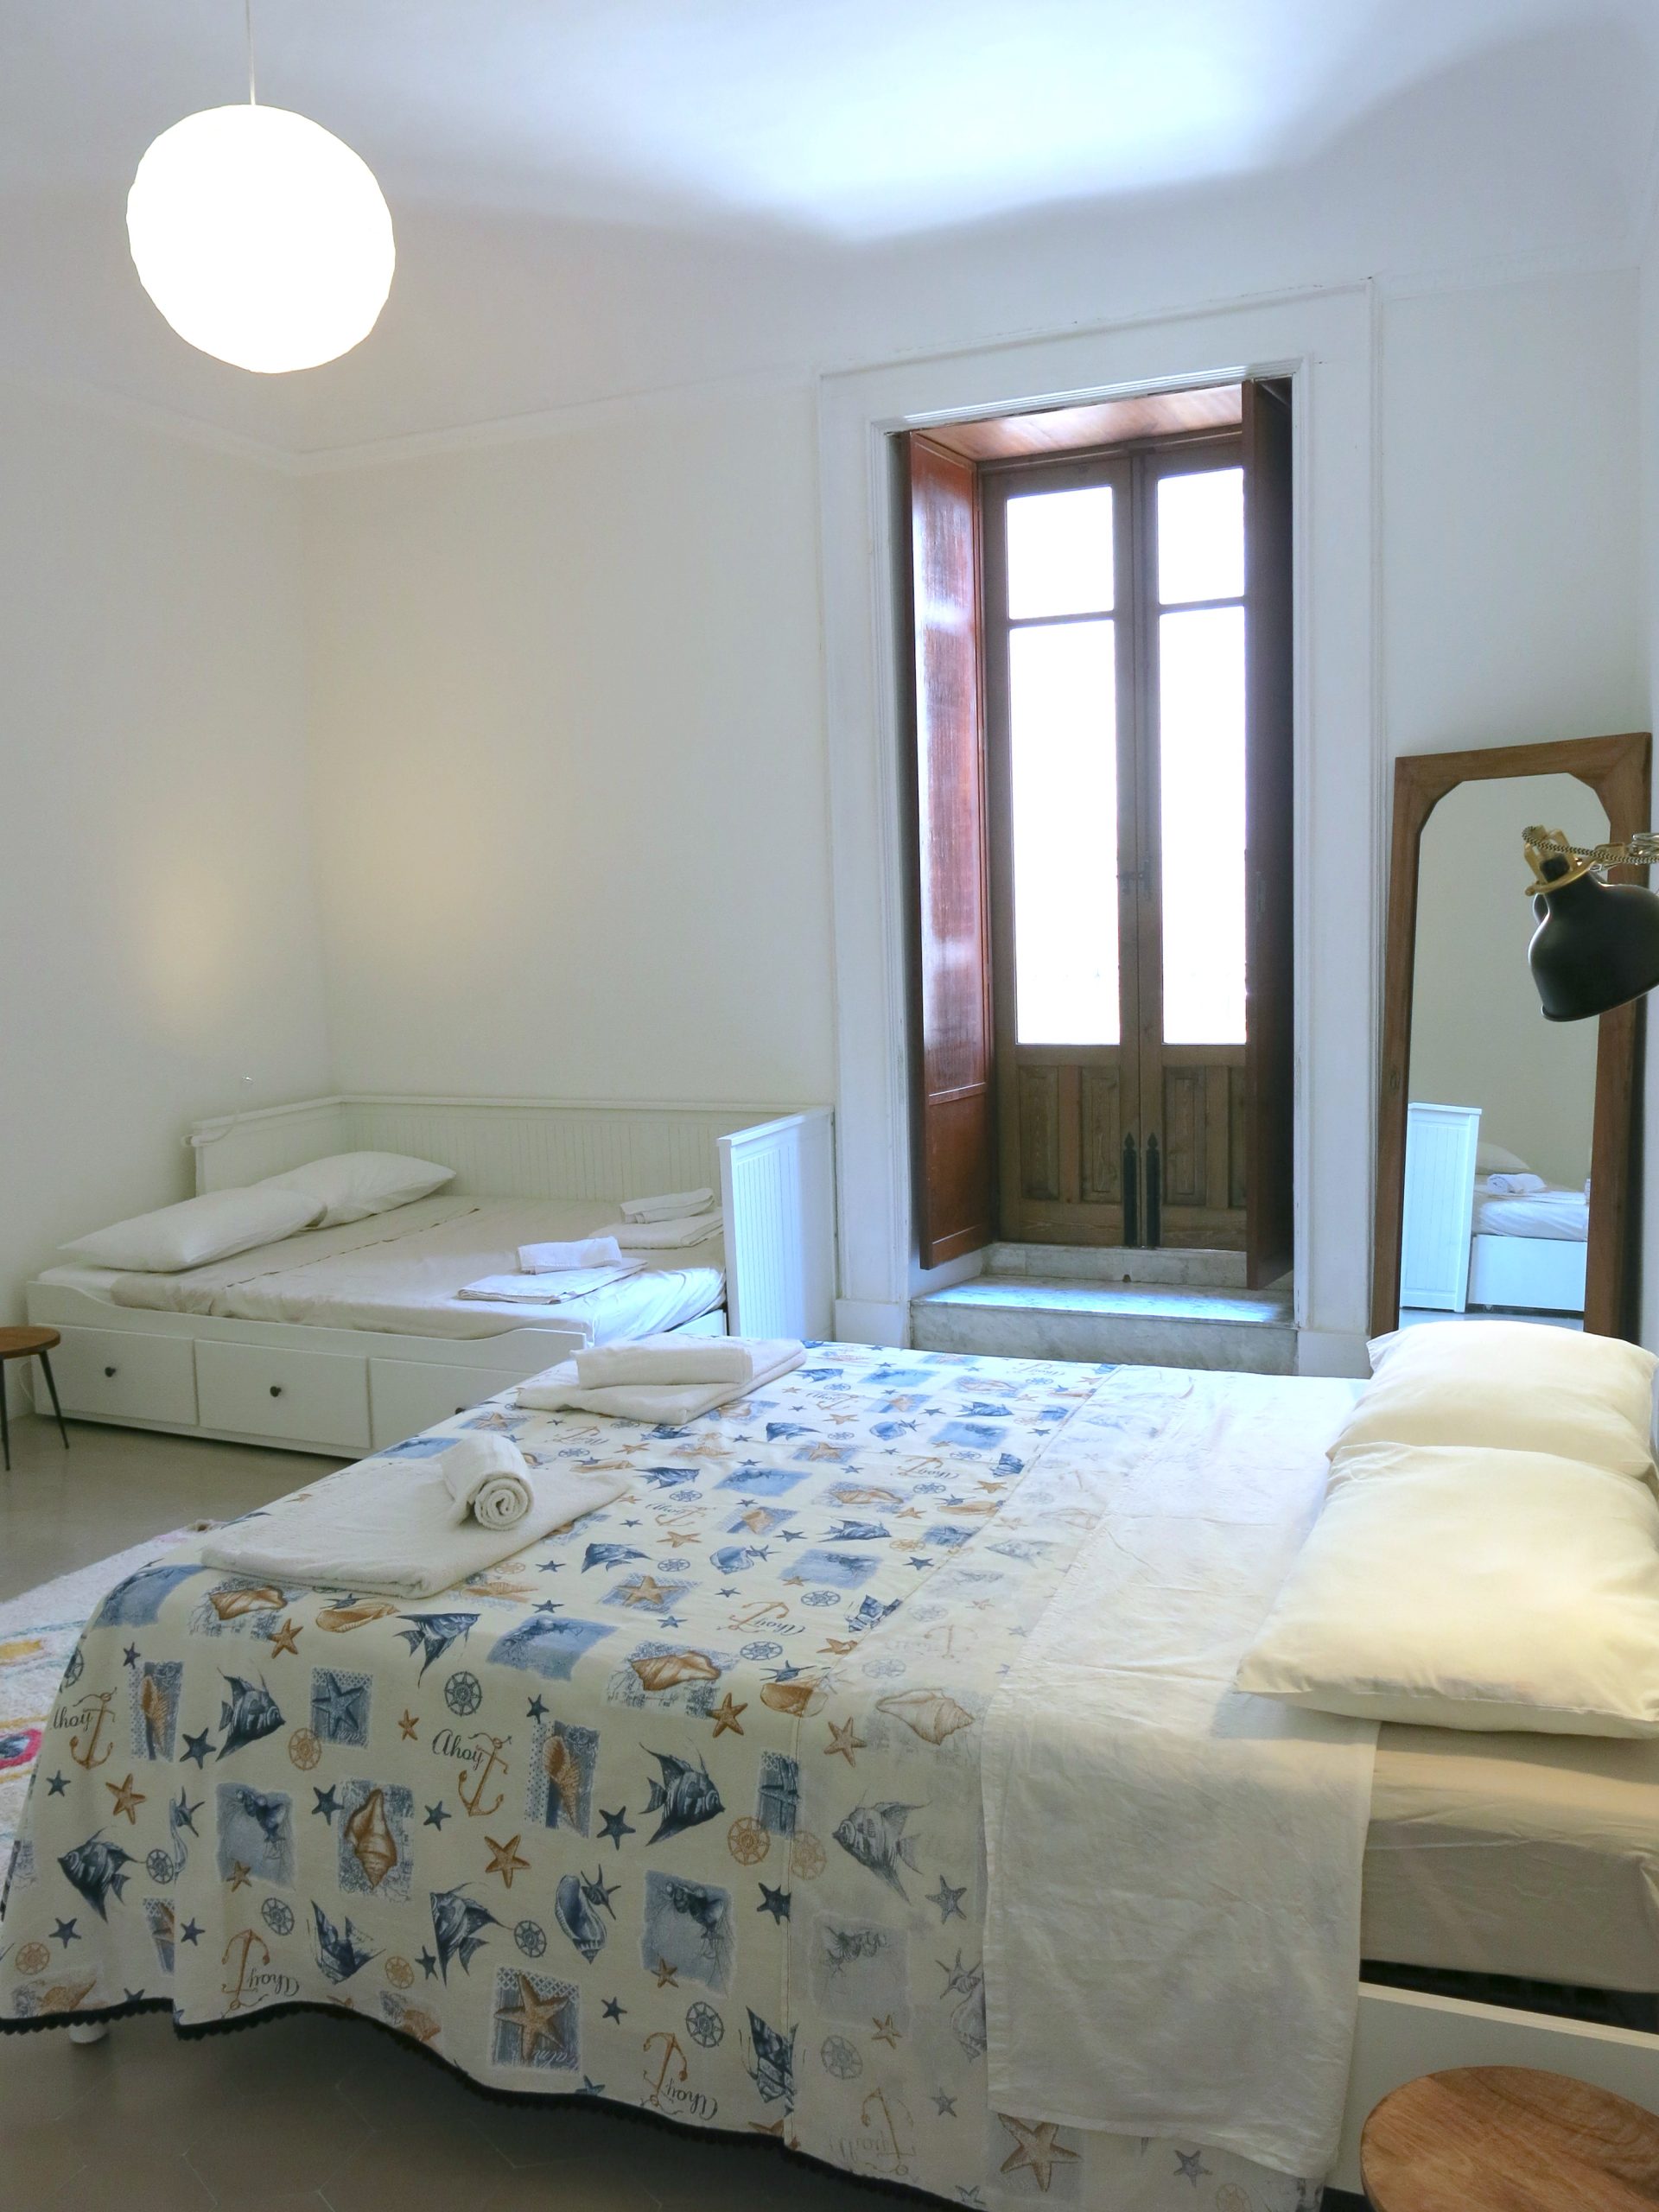 Apartment for rent in Siracusa - bedroom